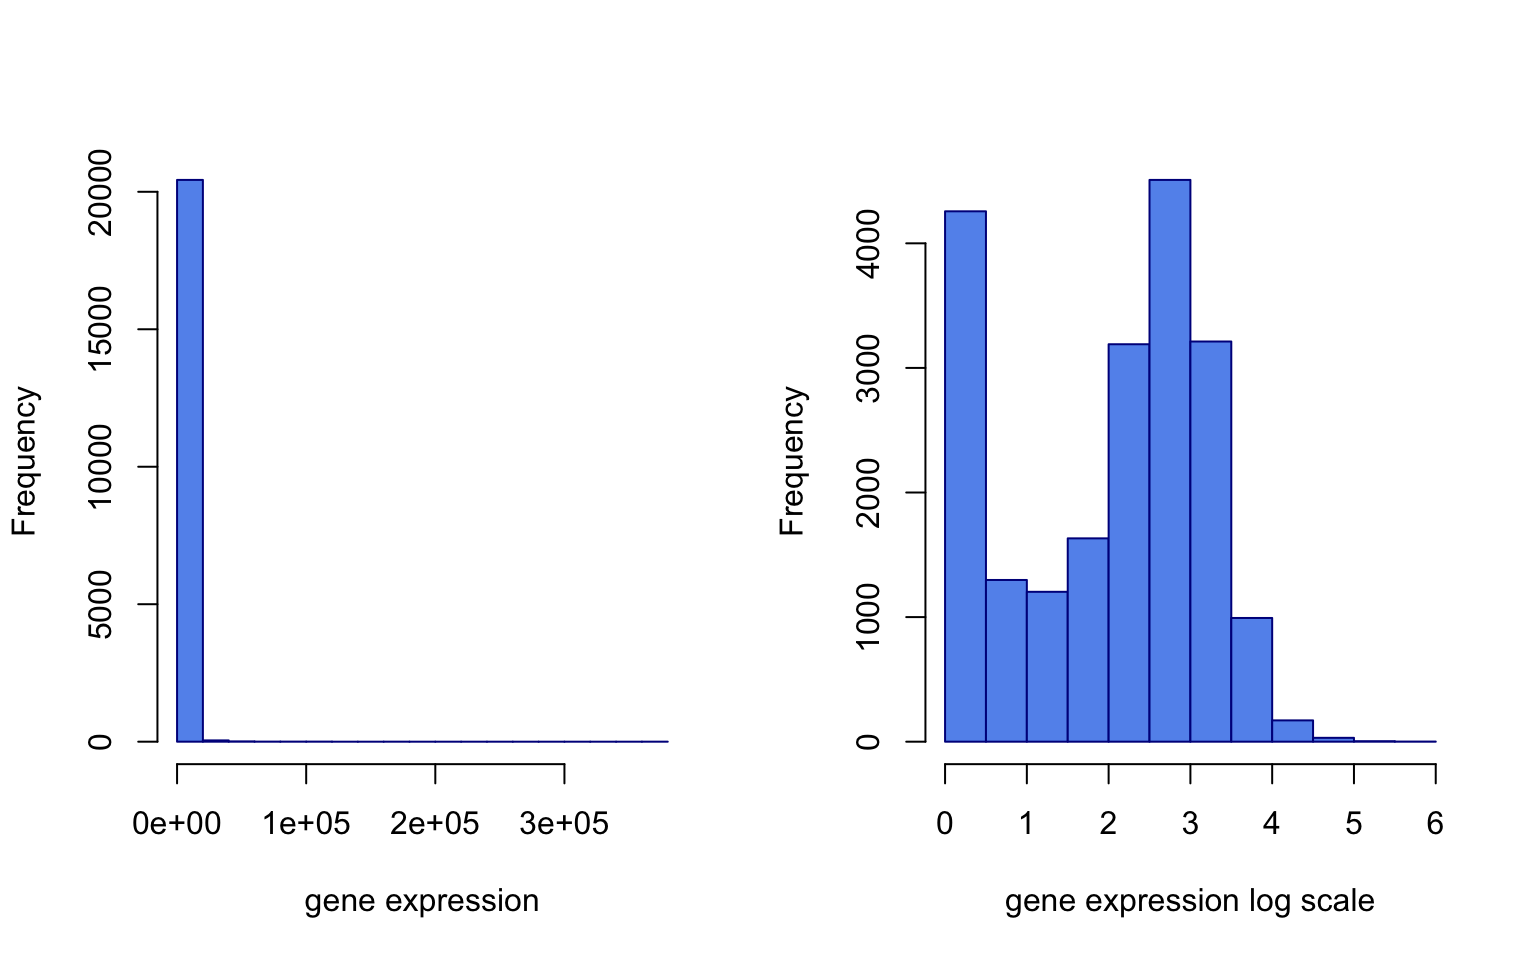 Gene expression distribution for the 5th patient (left). Log transformed gene expression distribution for the same patient (right).